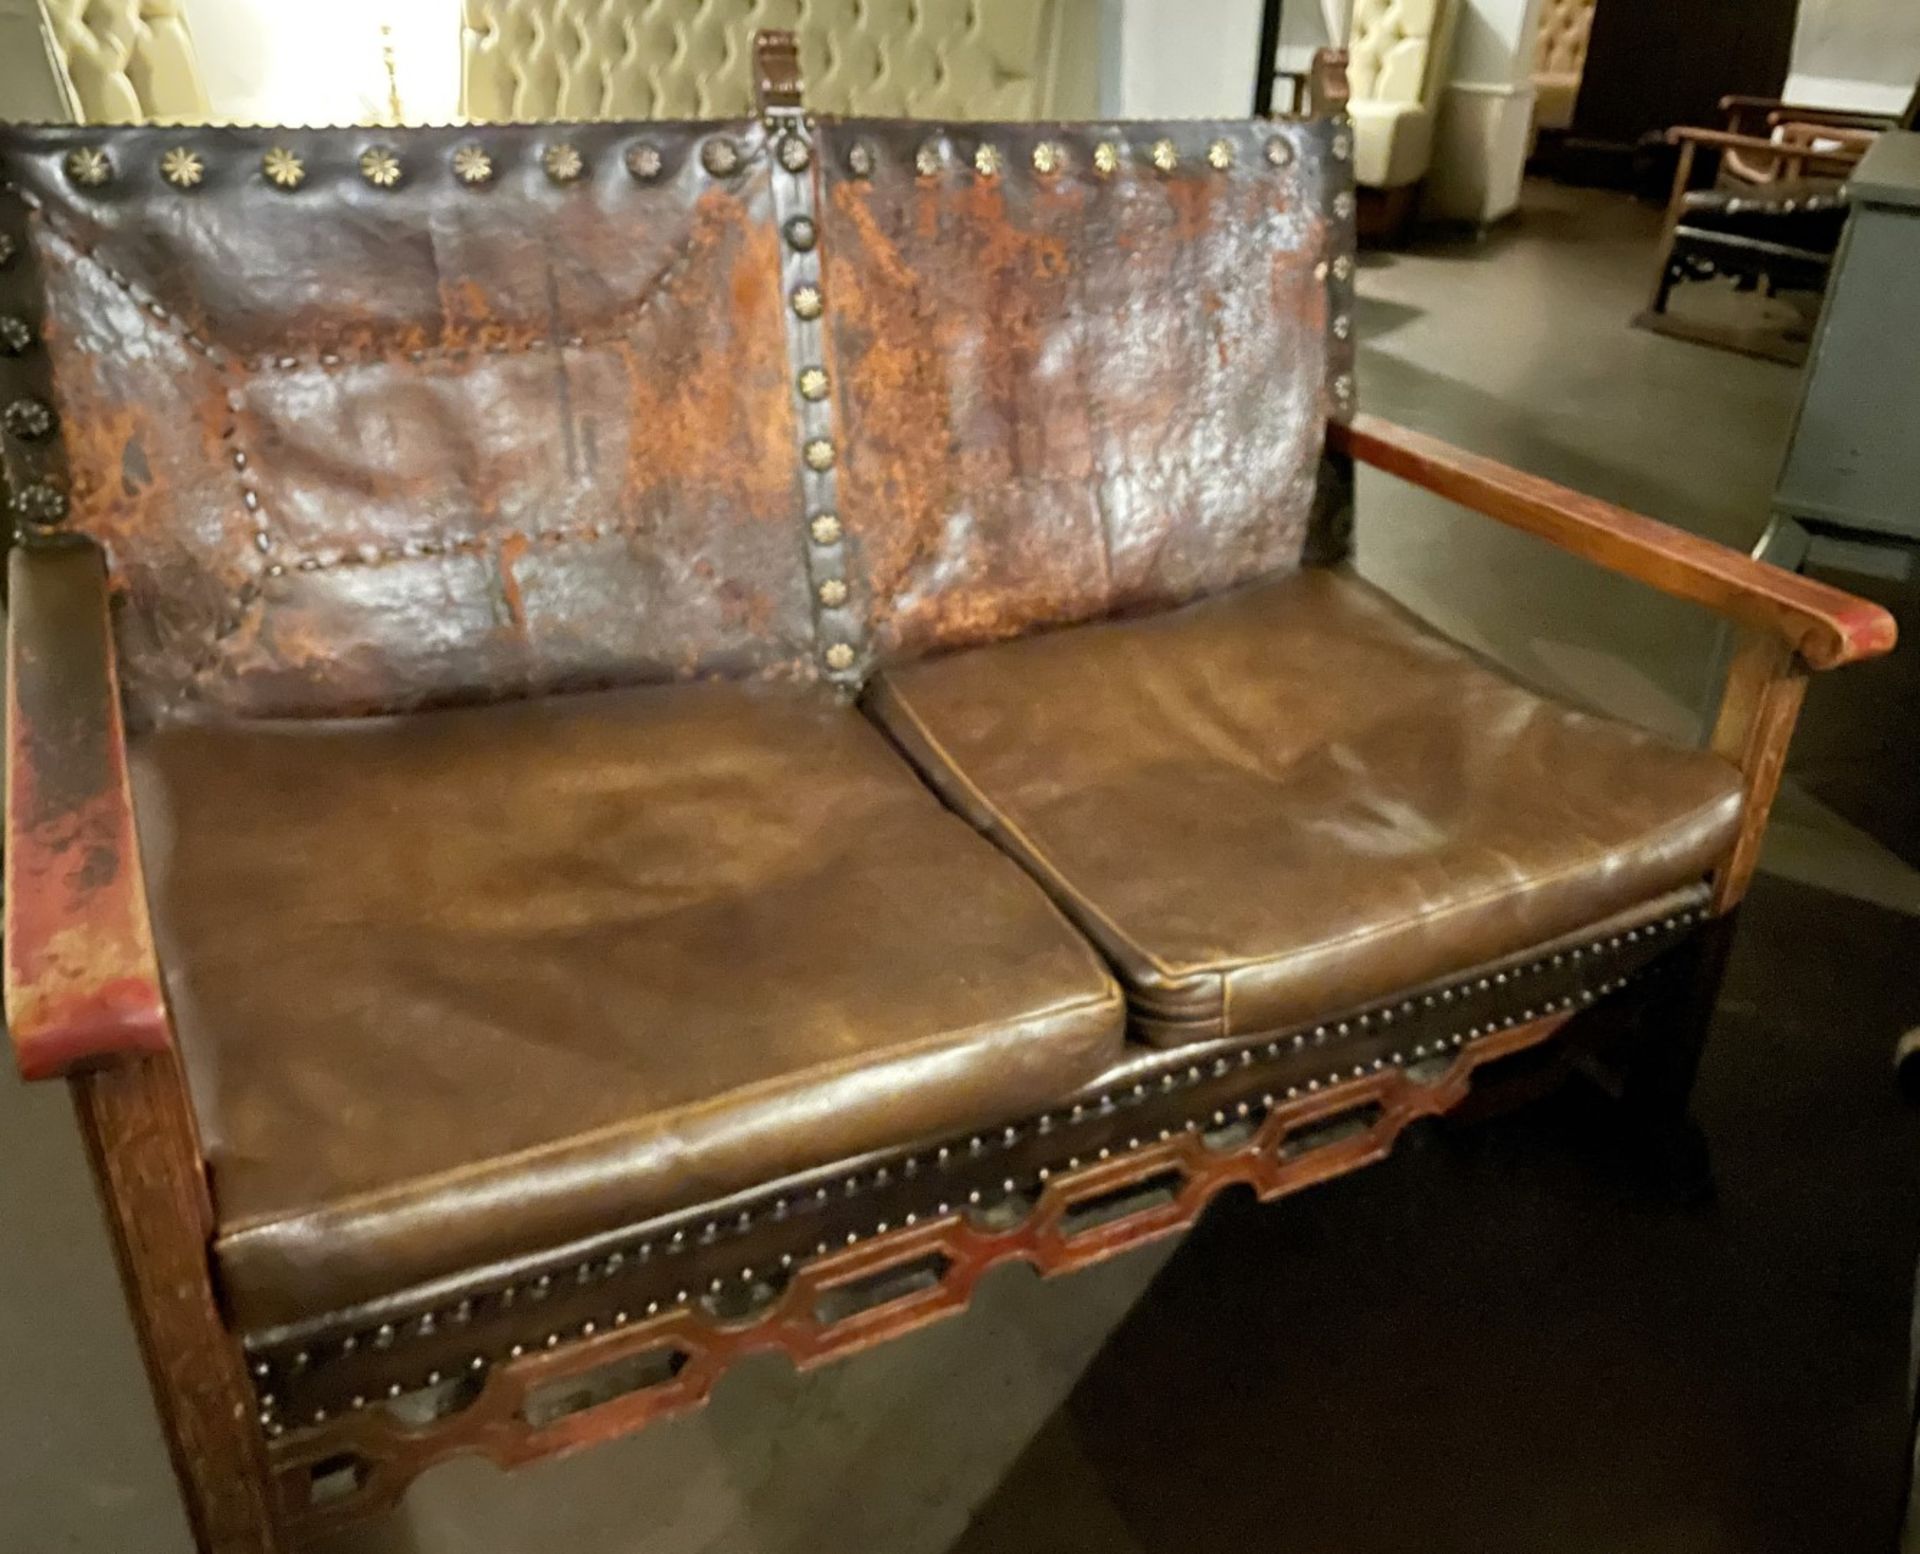 1 x Antique Gothic Revival Wooden 2-Seater Bench Chair, Upholstered in Heavy Brown Leather + Table - Image 3 of 15